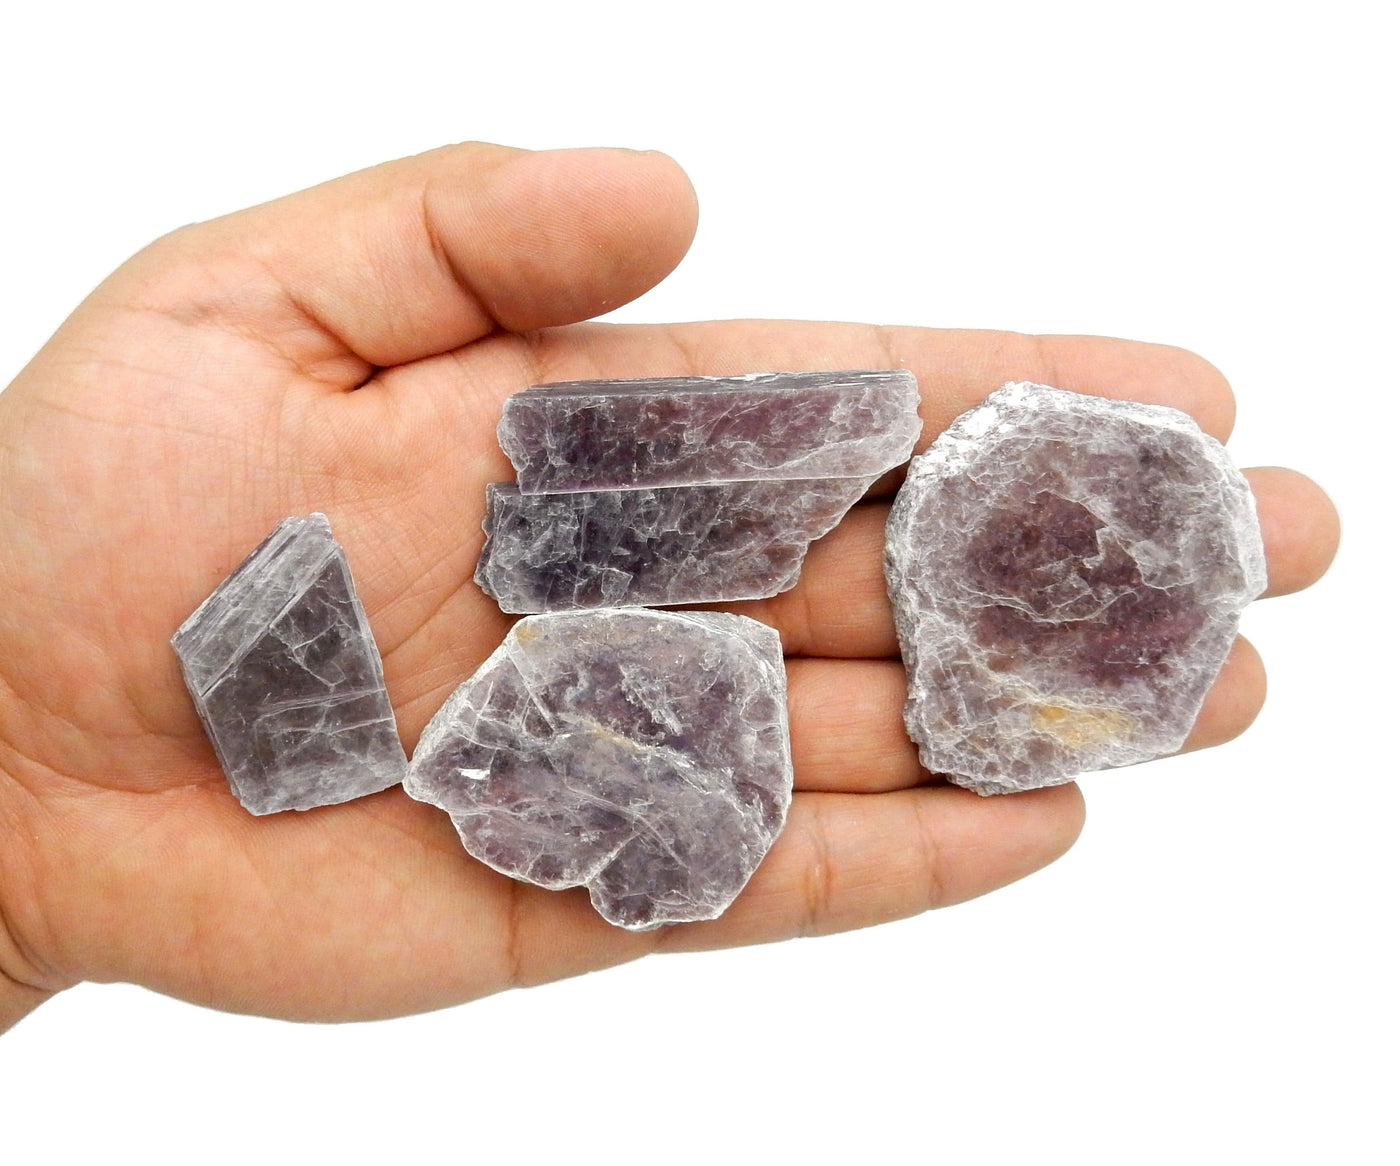 Lepidolite Mica Stones in a hand for size reference